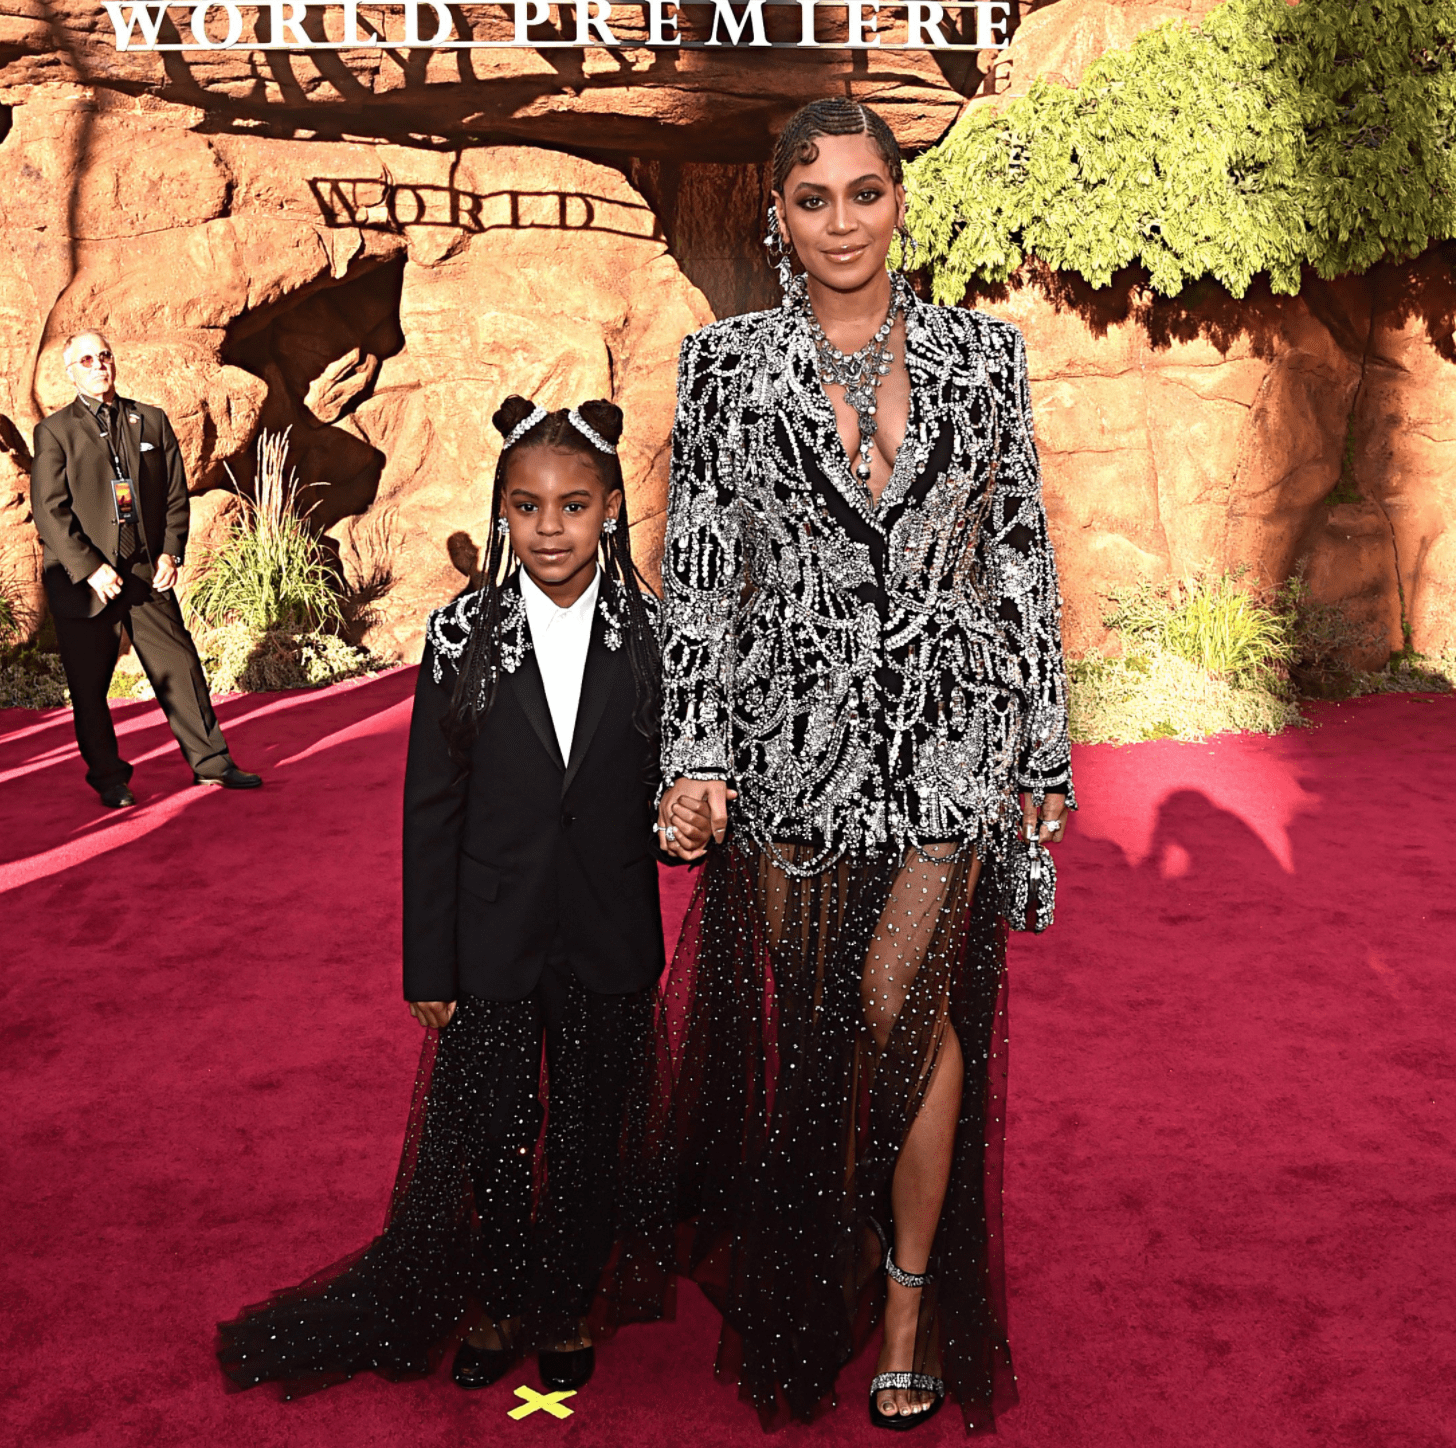 Beyoncé and her daughter, Blue Ivy, at the premiere of "The Lion King" in Hollywood, July, 2019. | Source: Getty Images.